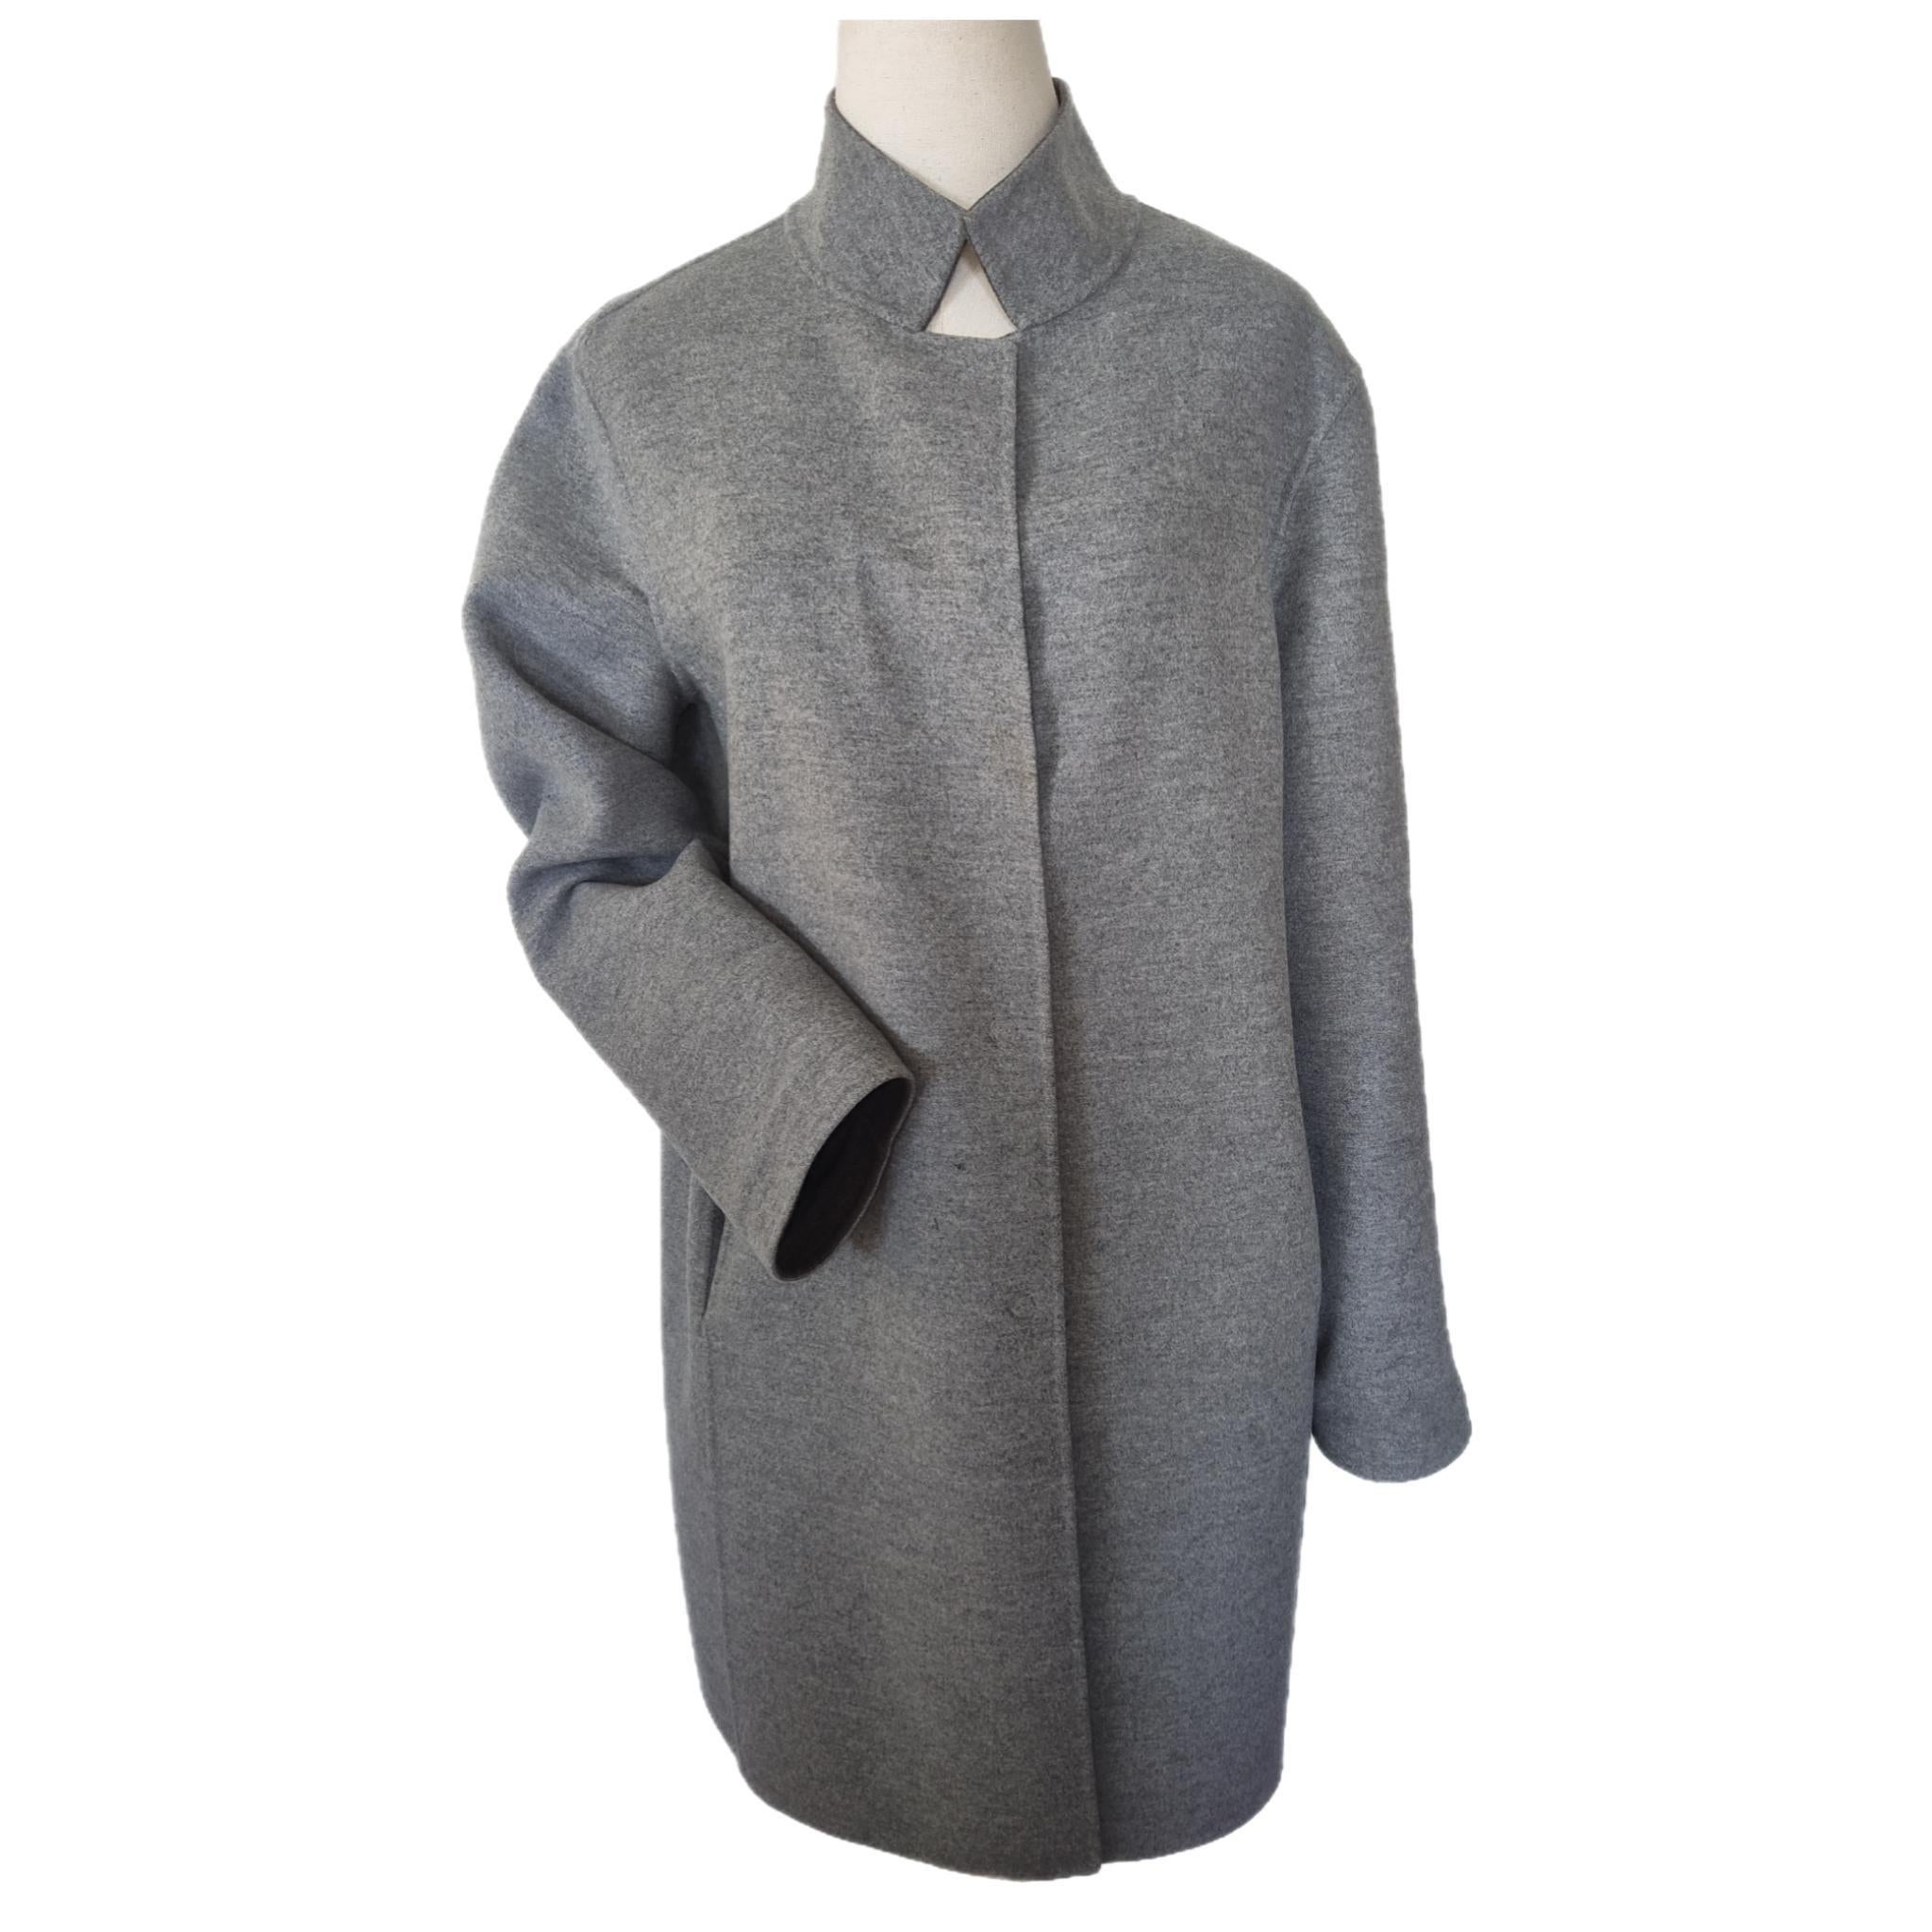 Reversible Cashmere Loro Piana with 

Some defects 

Made in Italy 

Color: Gray and Charcoal

Collar: short tuxedo 

